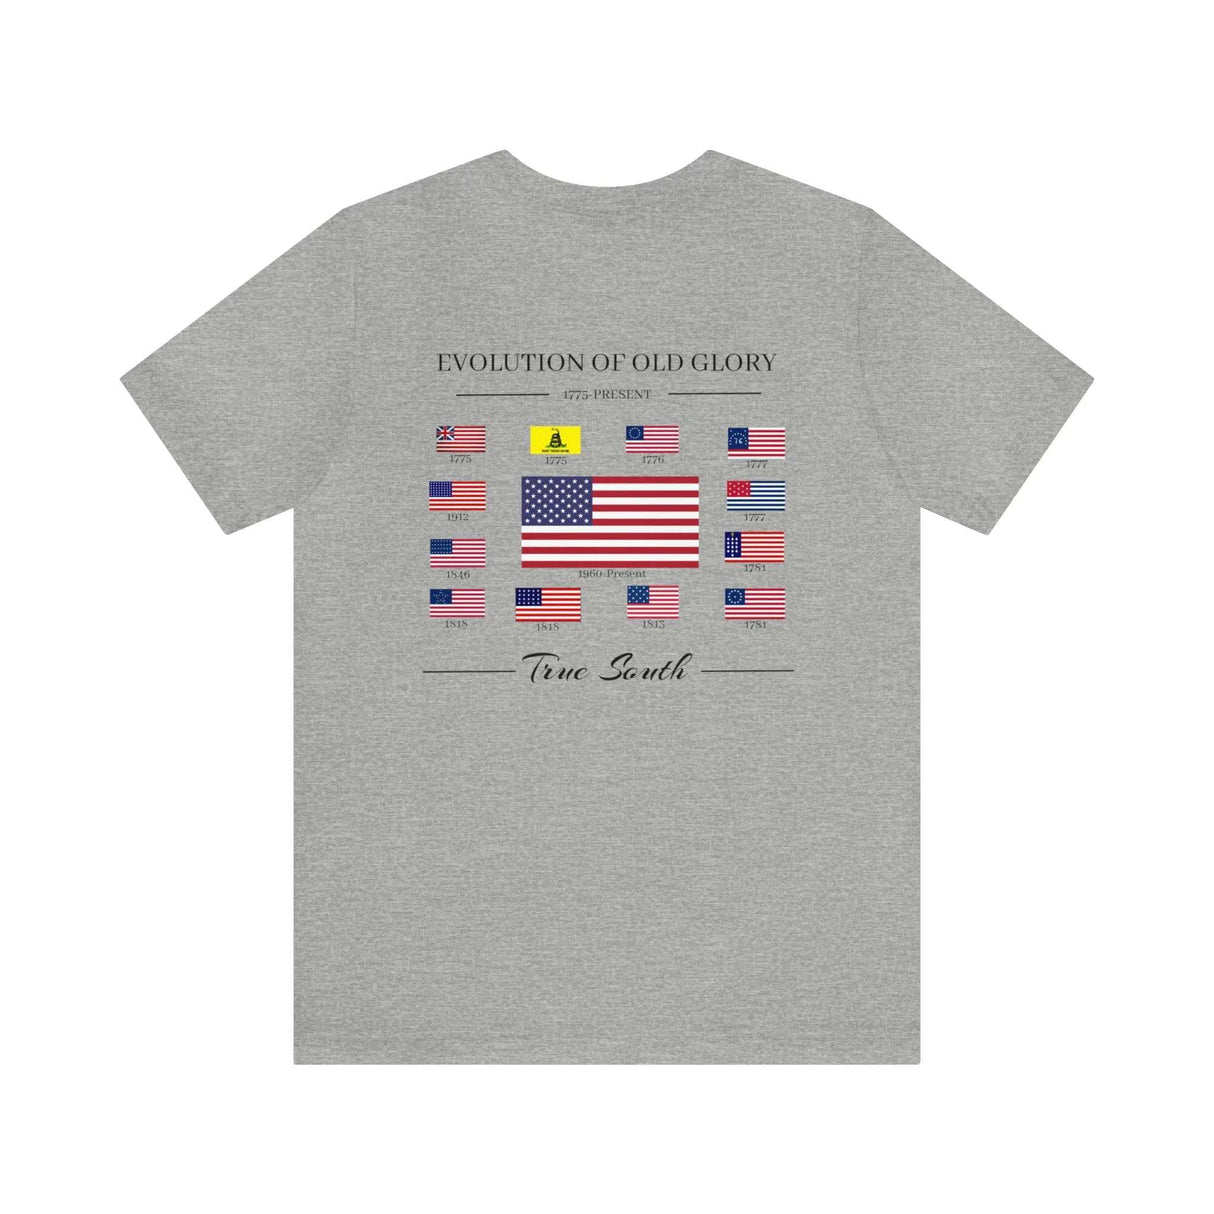 Evolution Of Old Glory Shirt - True South